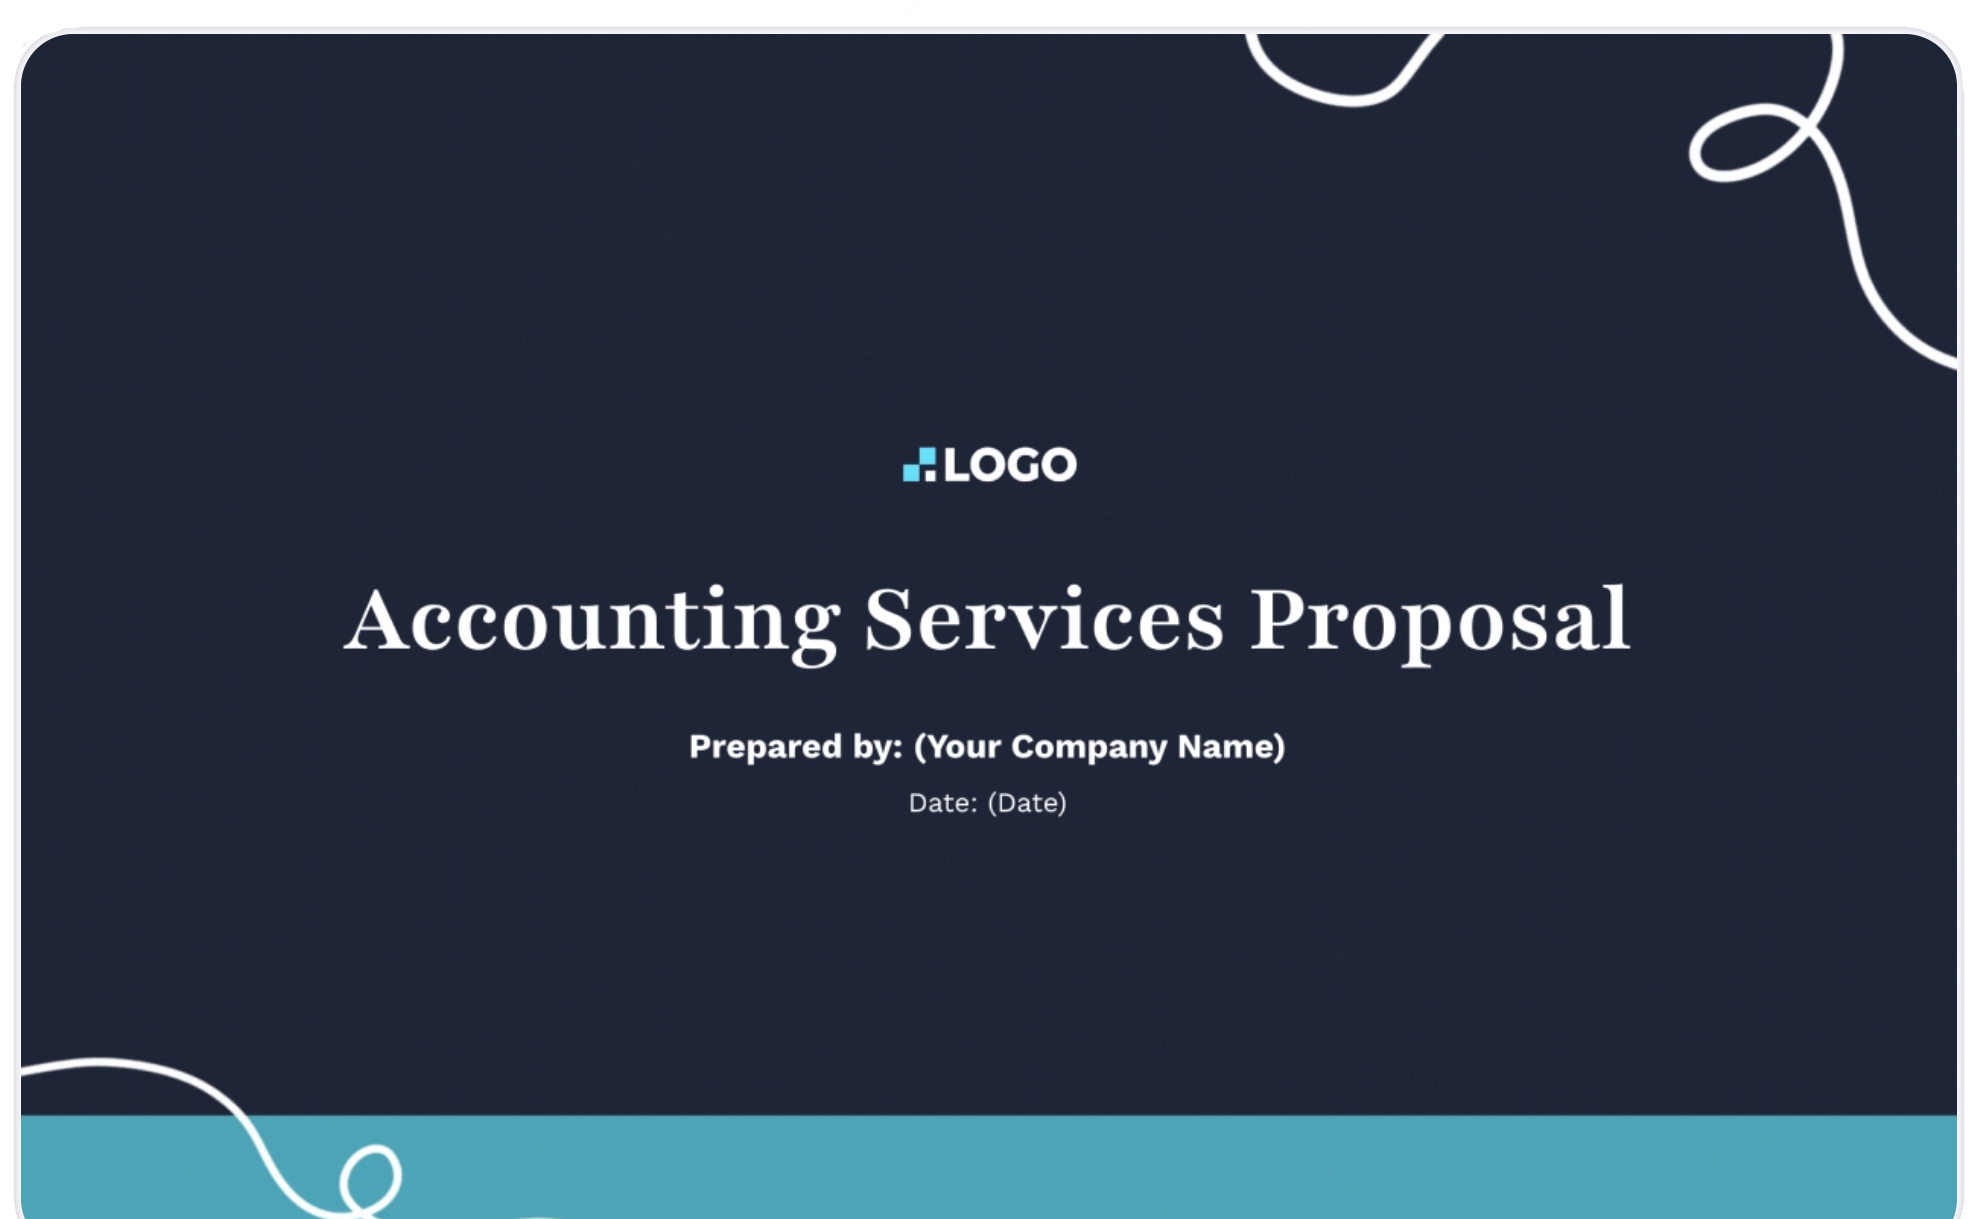 an accounting services proposal is prepared by your company name